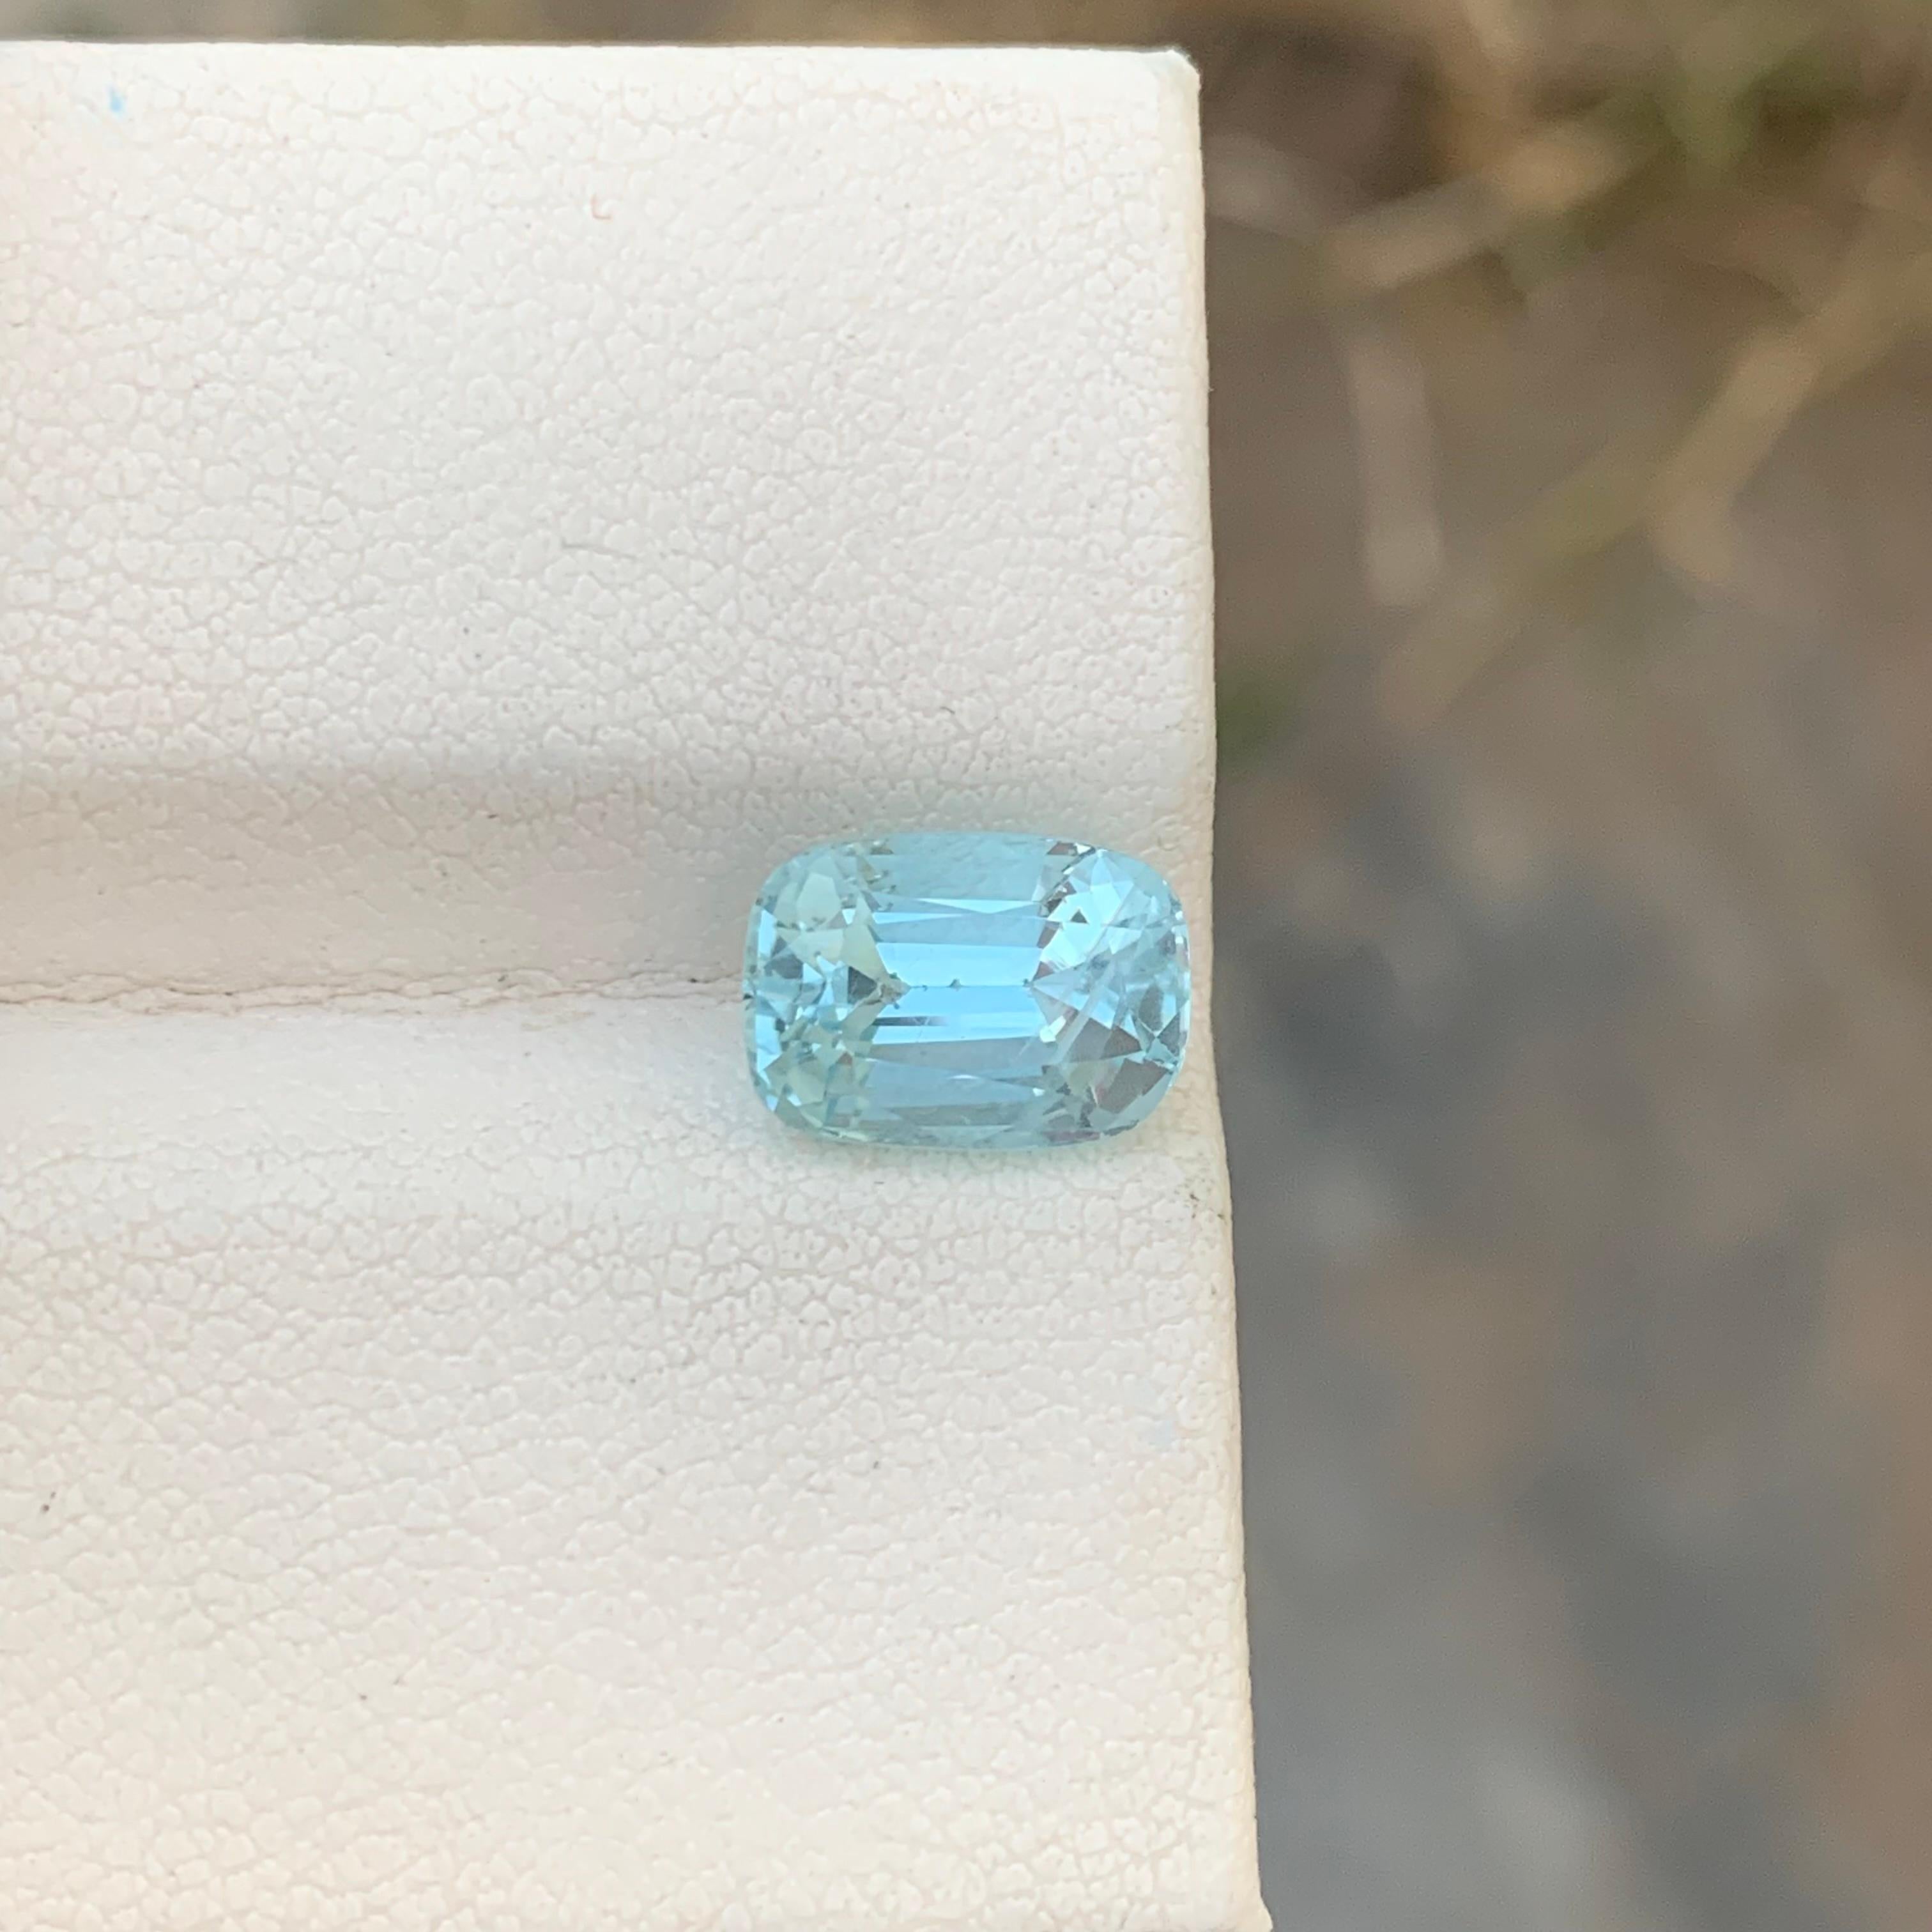 Loose Aquamarine
Weight: 2.60 Carat
Dimension: 9.7 x 6.9 x 6 Mm
Colour : Blue and white
Origin: Shigar Valley, Pakistan
Treatment: Non
Certificate : On Demand
Shape: Cushion 

Aquamarine is a captivating gemstone known for its enchanting blue-green